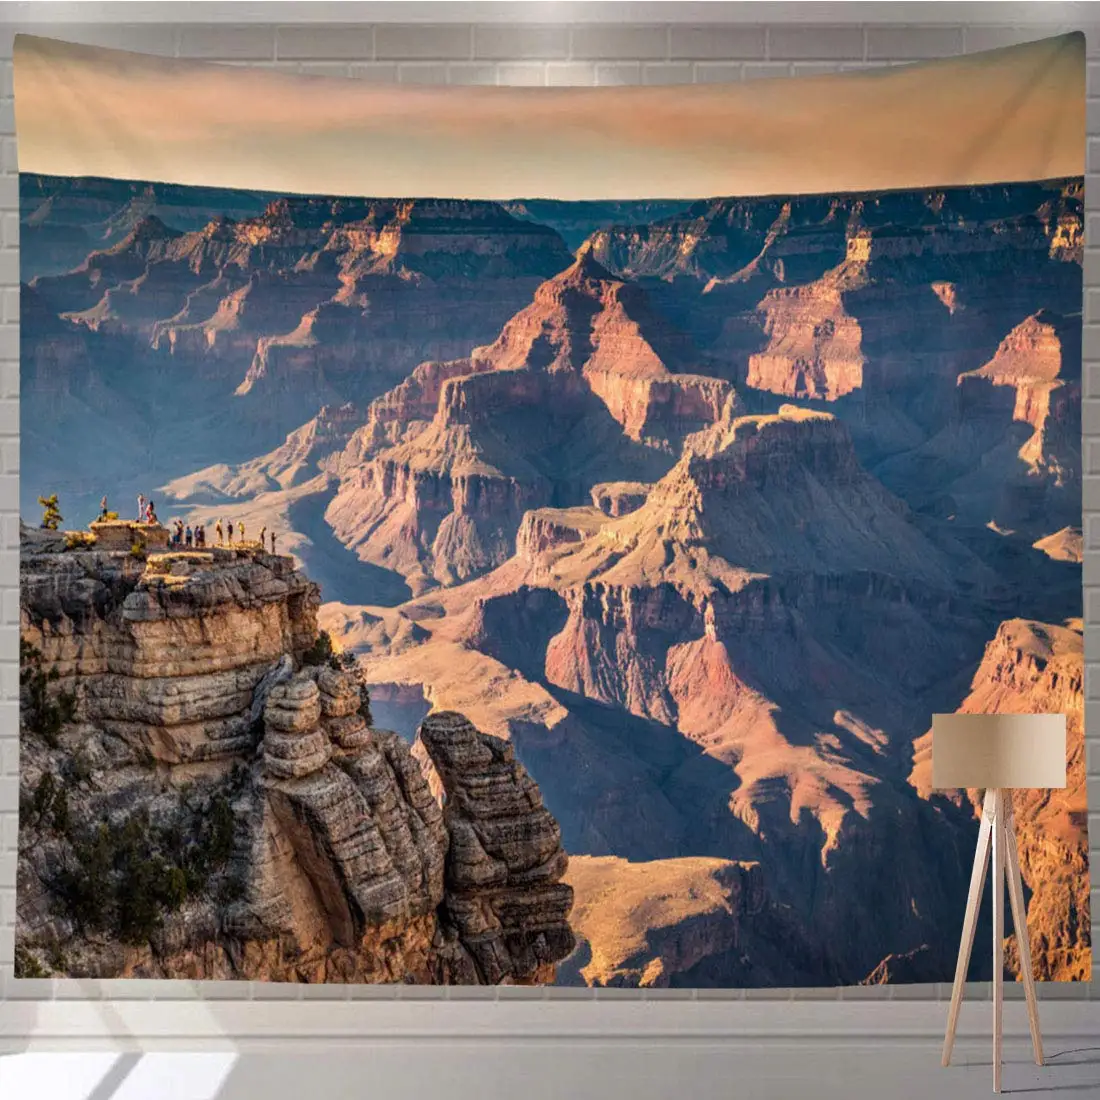 

Canyon Landscape Tapestry Grand Canyon National Park Natural Landforms Tapestry Wall Hanging Decor for Bedroom Living Room Dorm